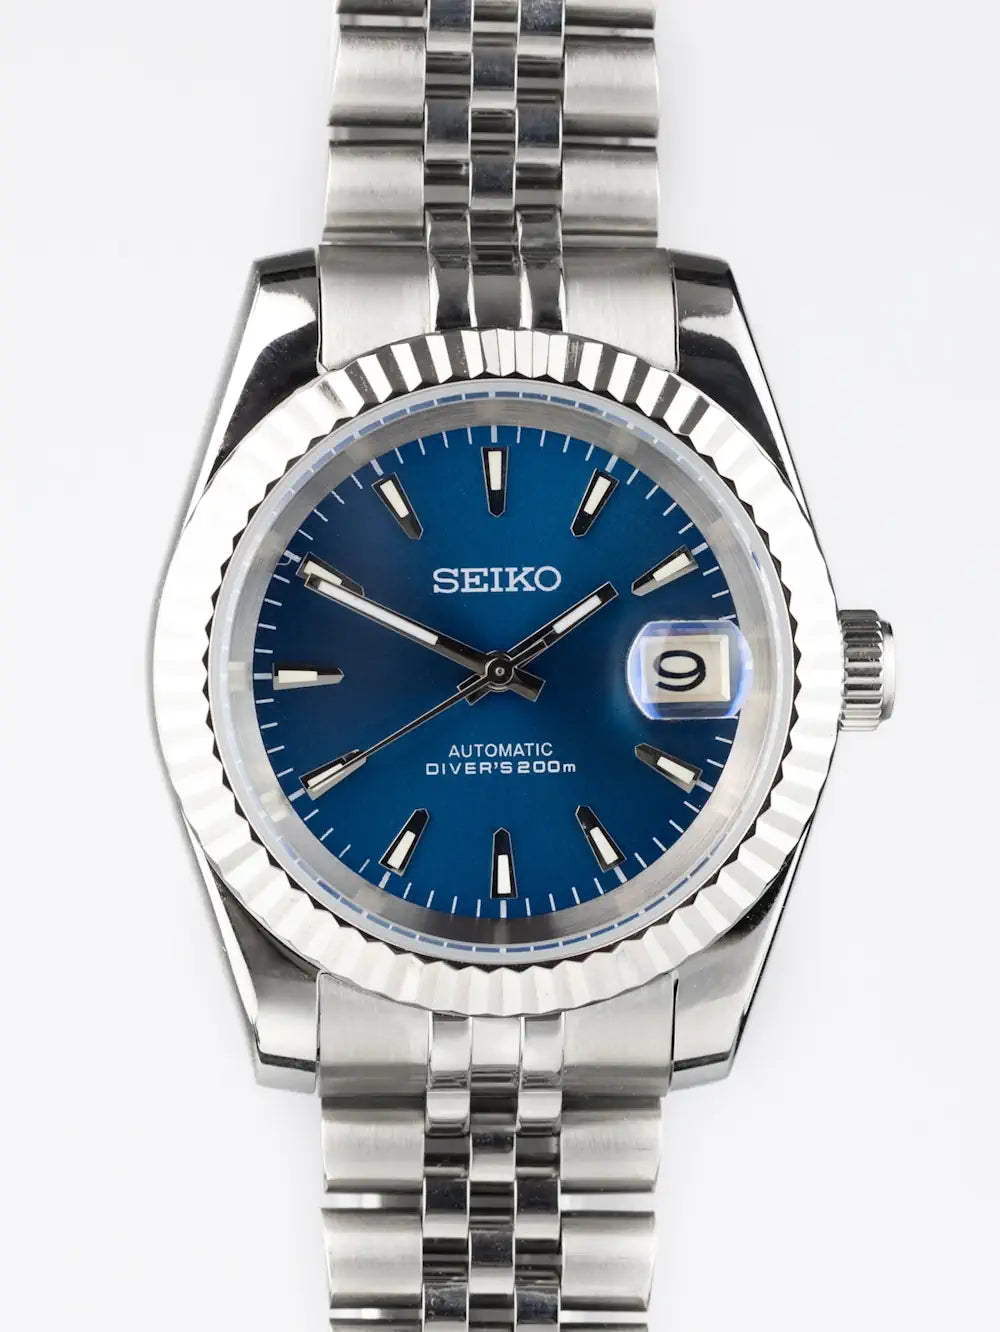 Seiko Datejust Mod Watch Blue Dial with Skeleton Back